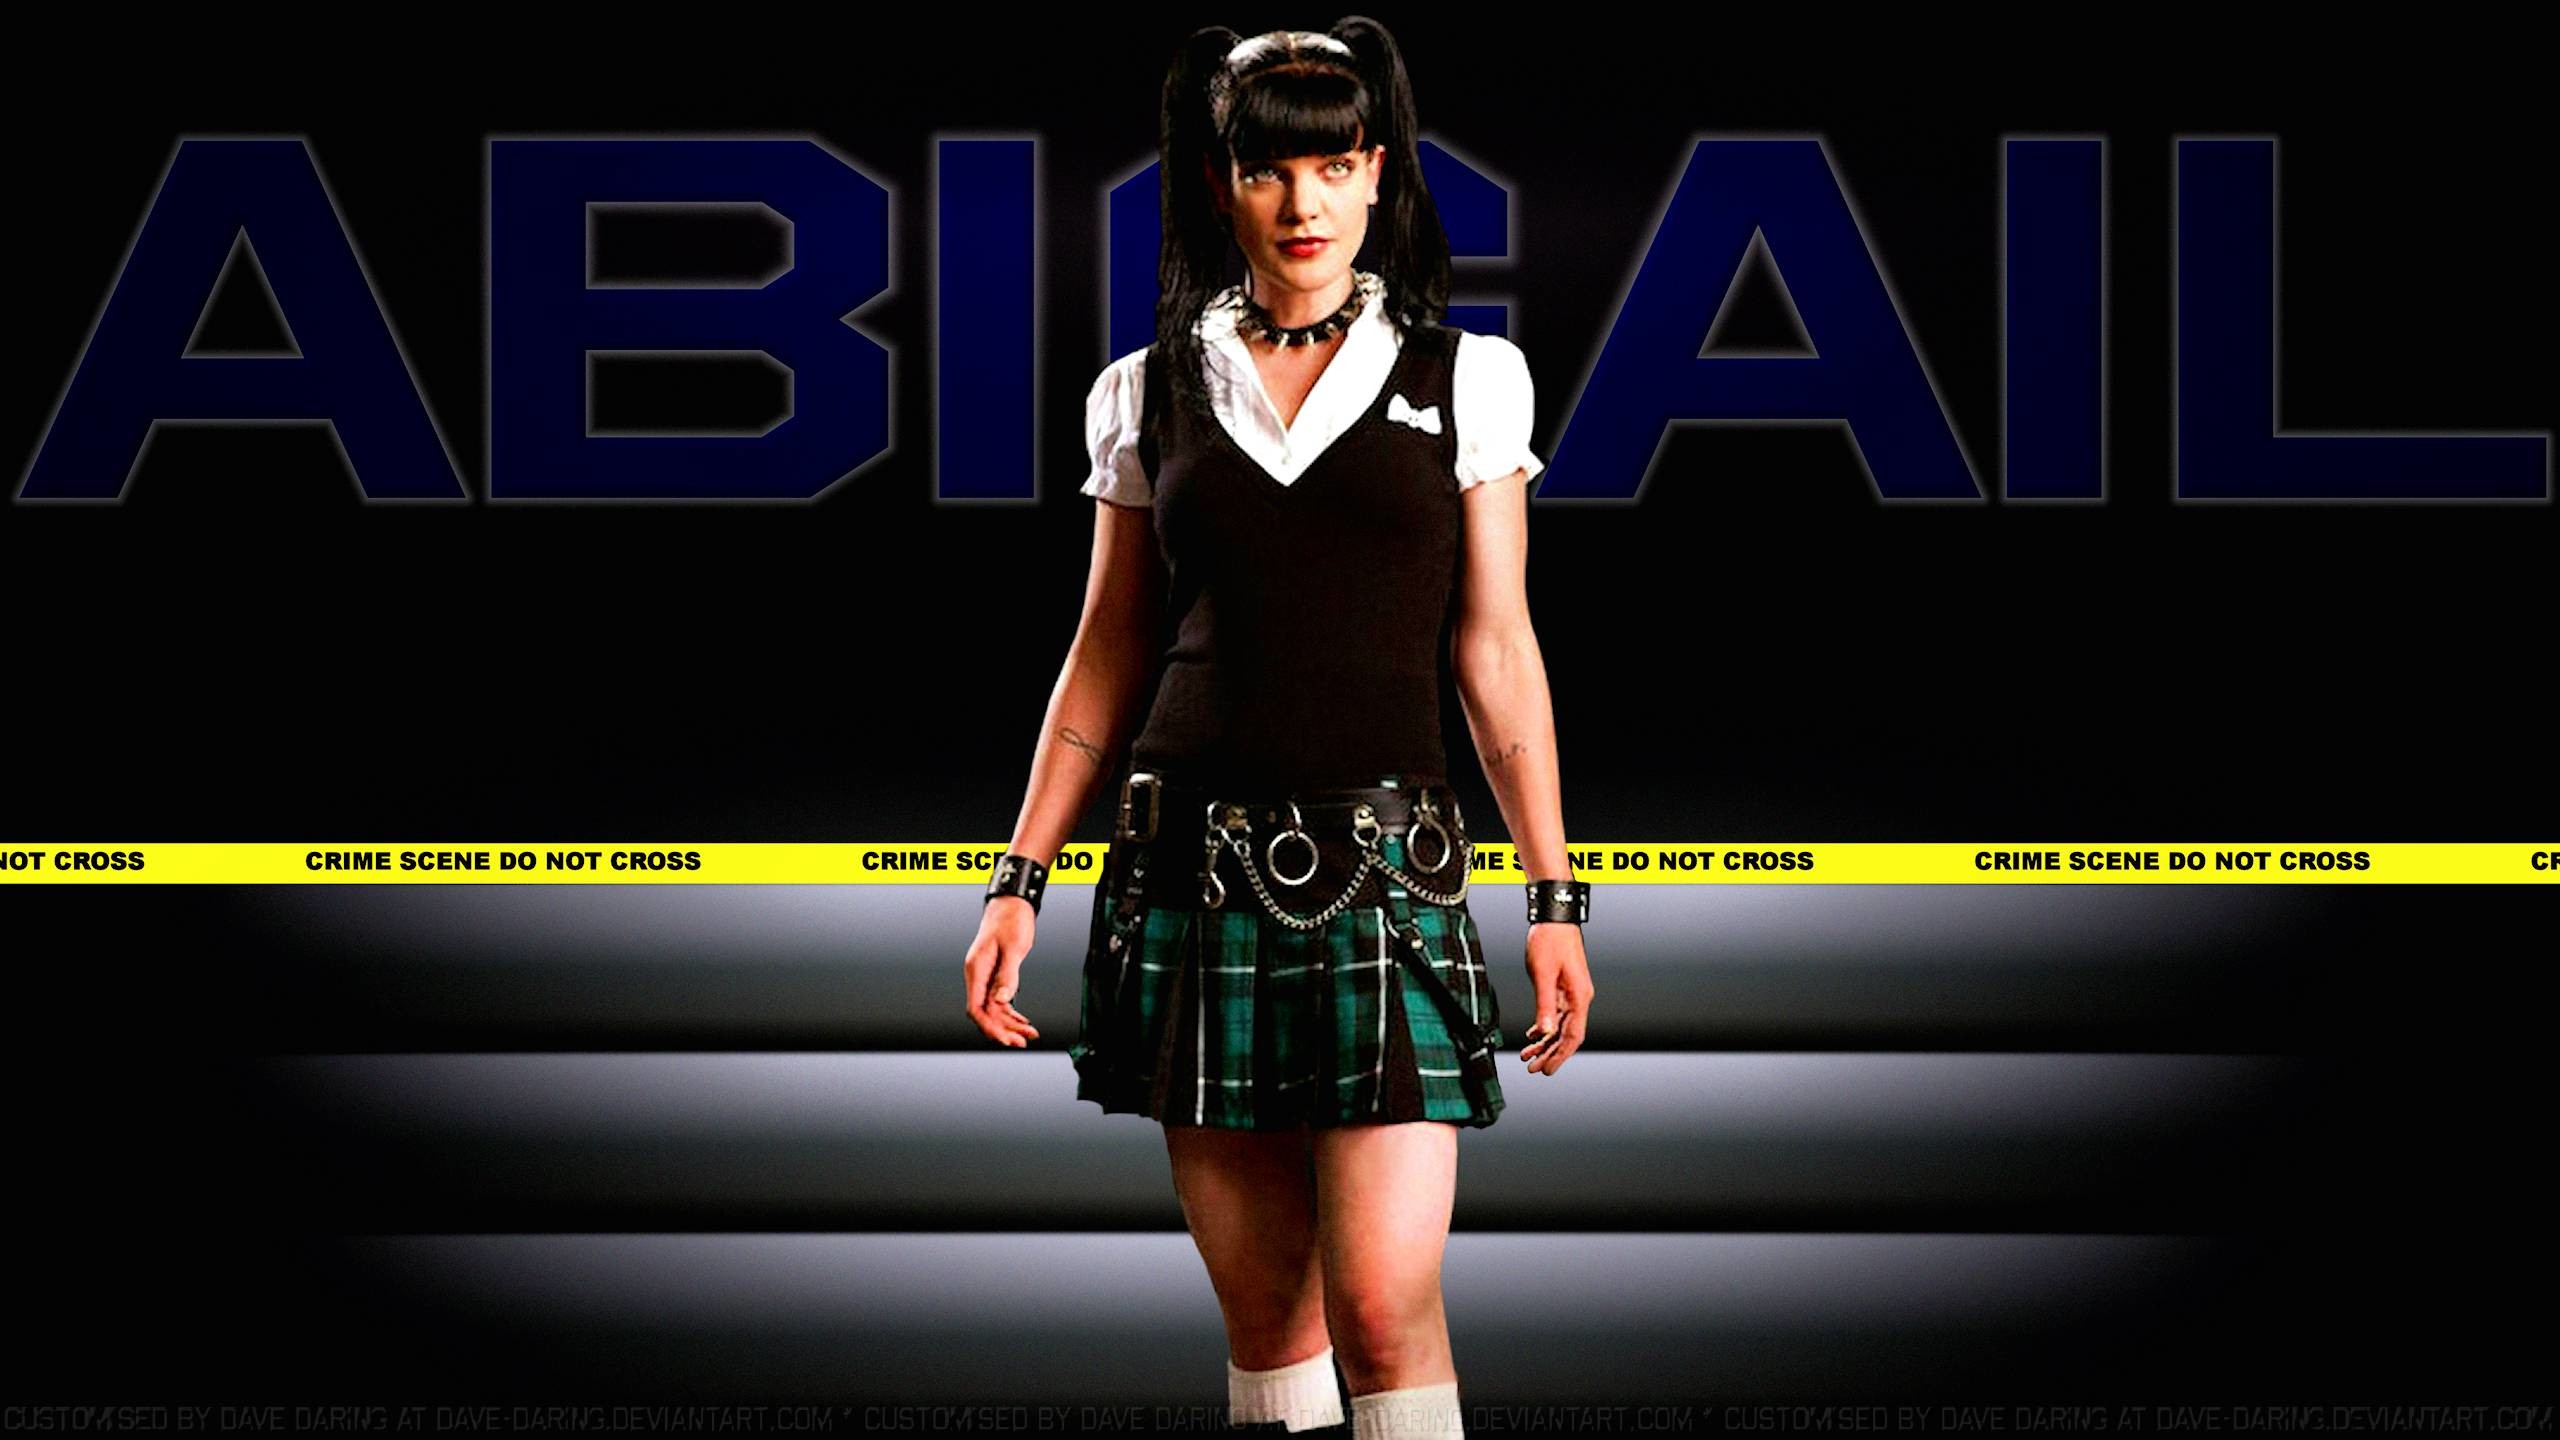 2560x1440 Pauley Perrette Crime Fighter Abby by Dave-Daring